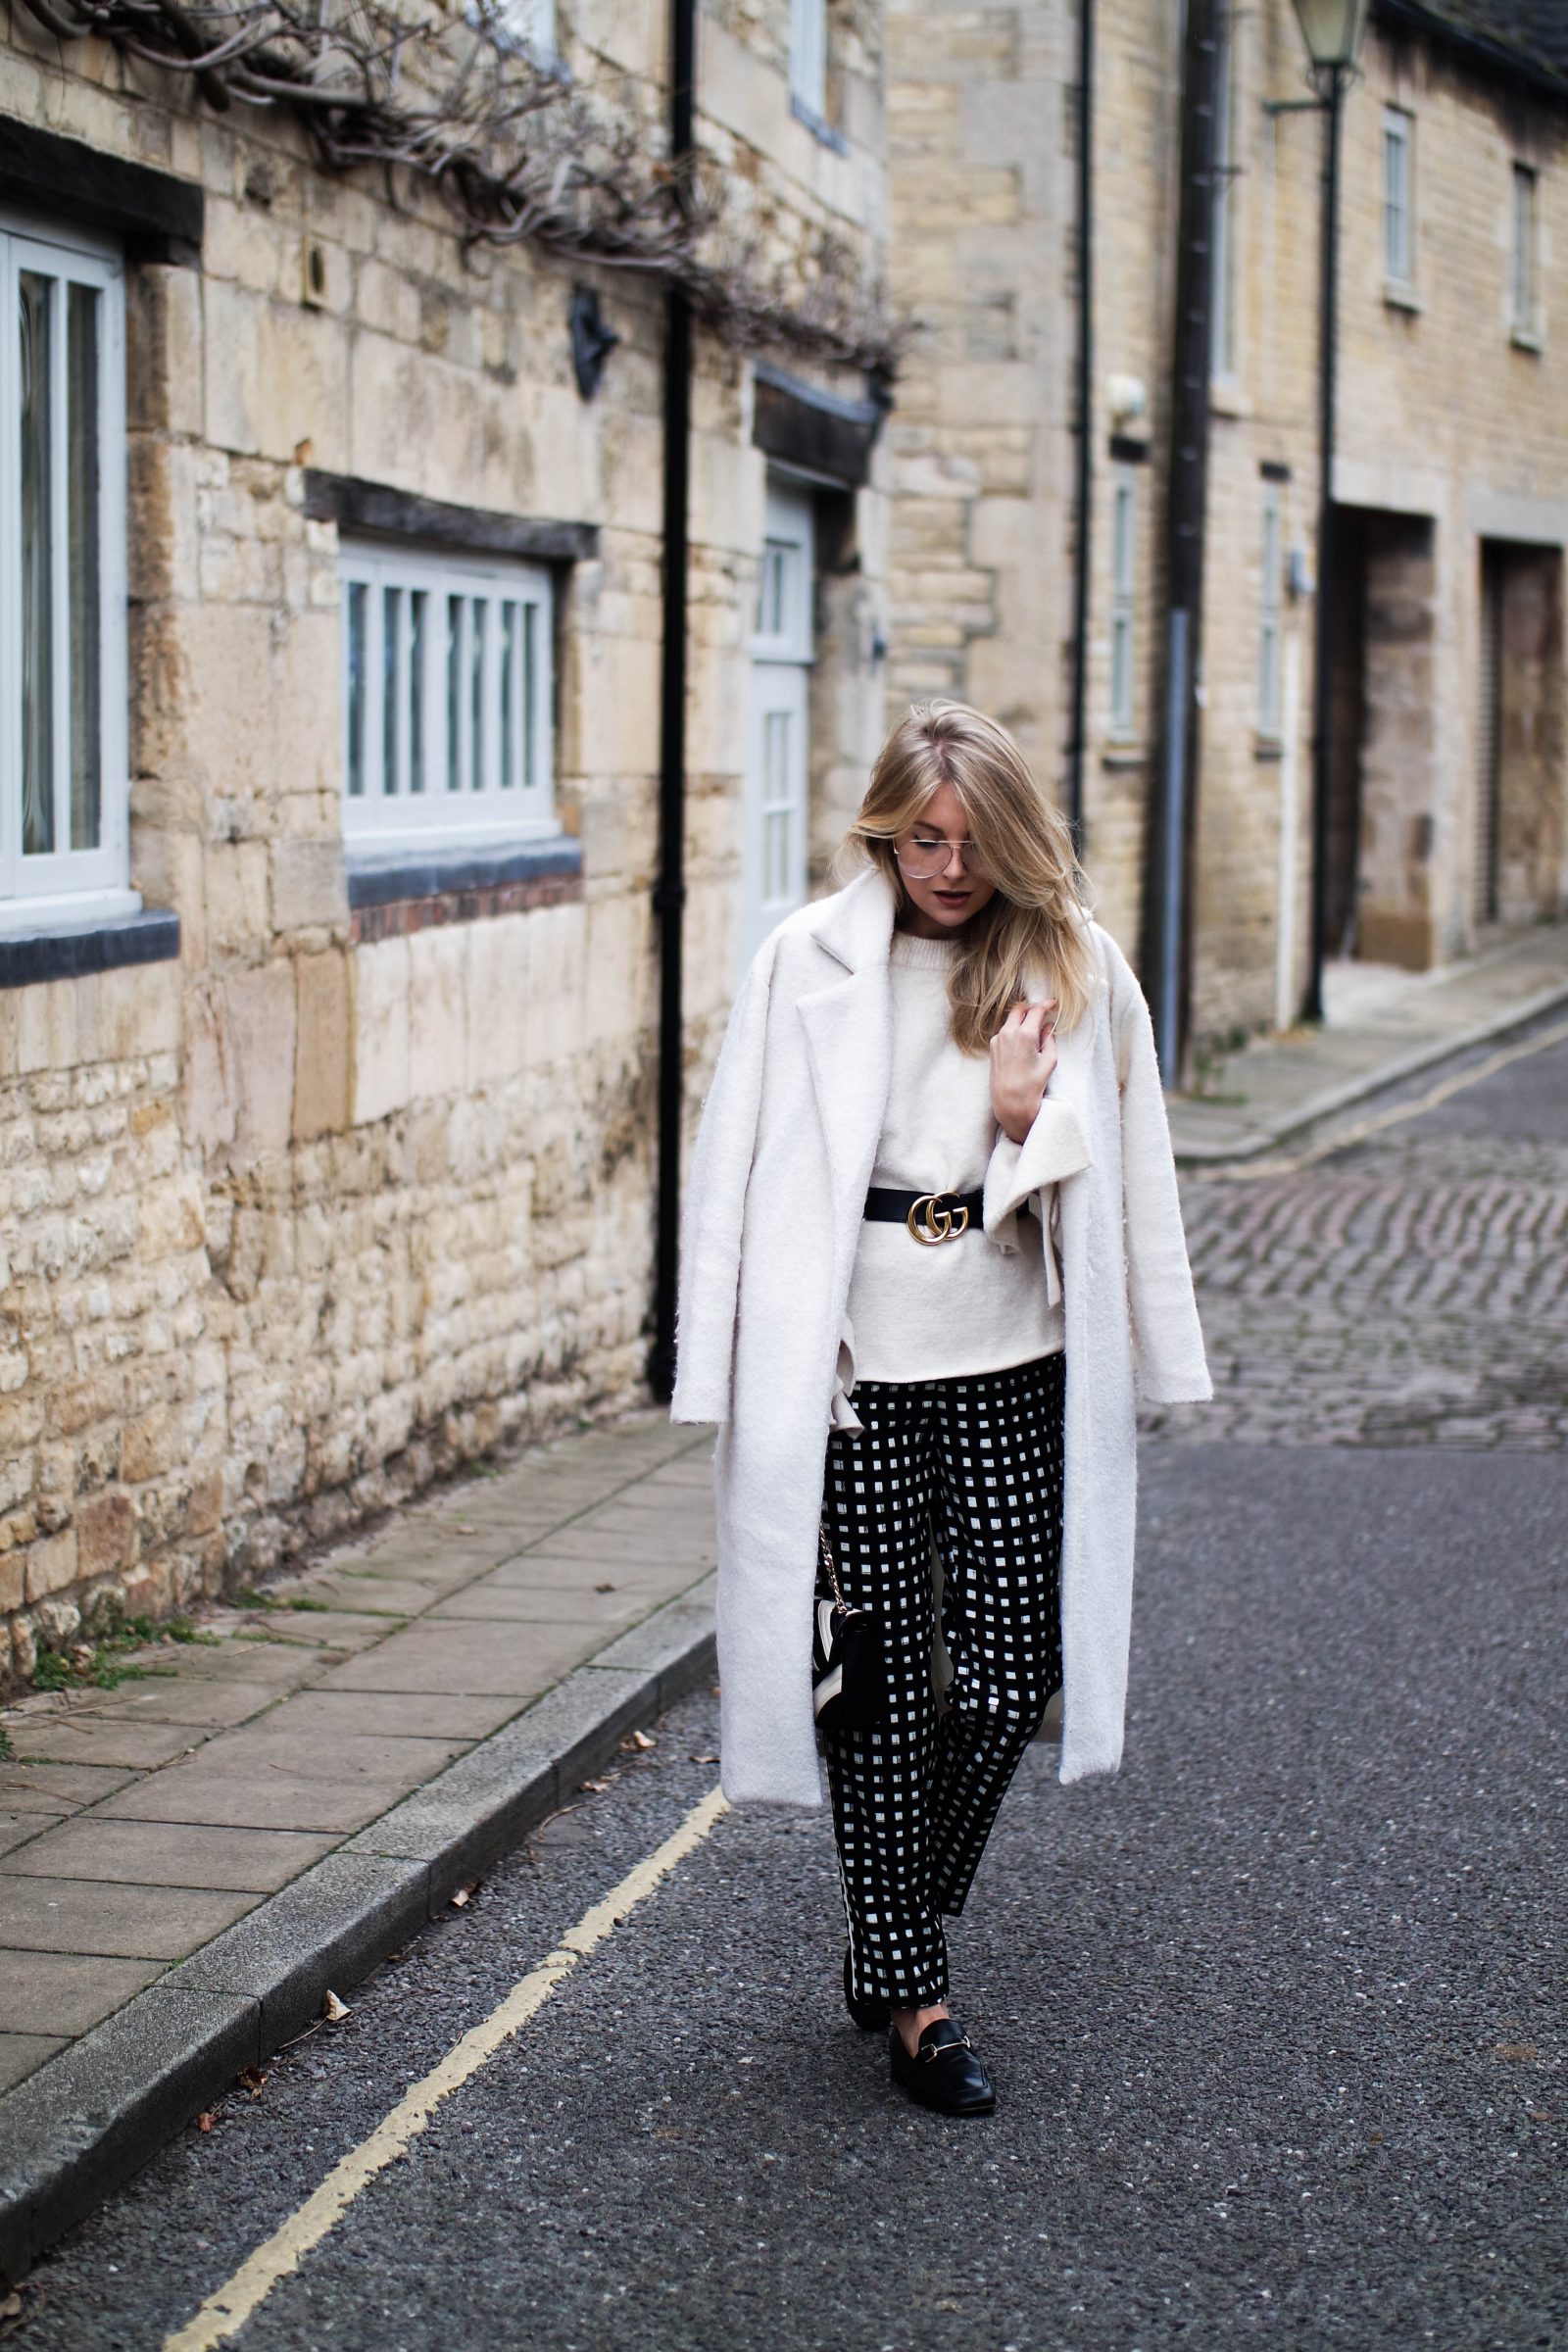 Printed Trousers Trying Something New - Street Style Checked Trousers 